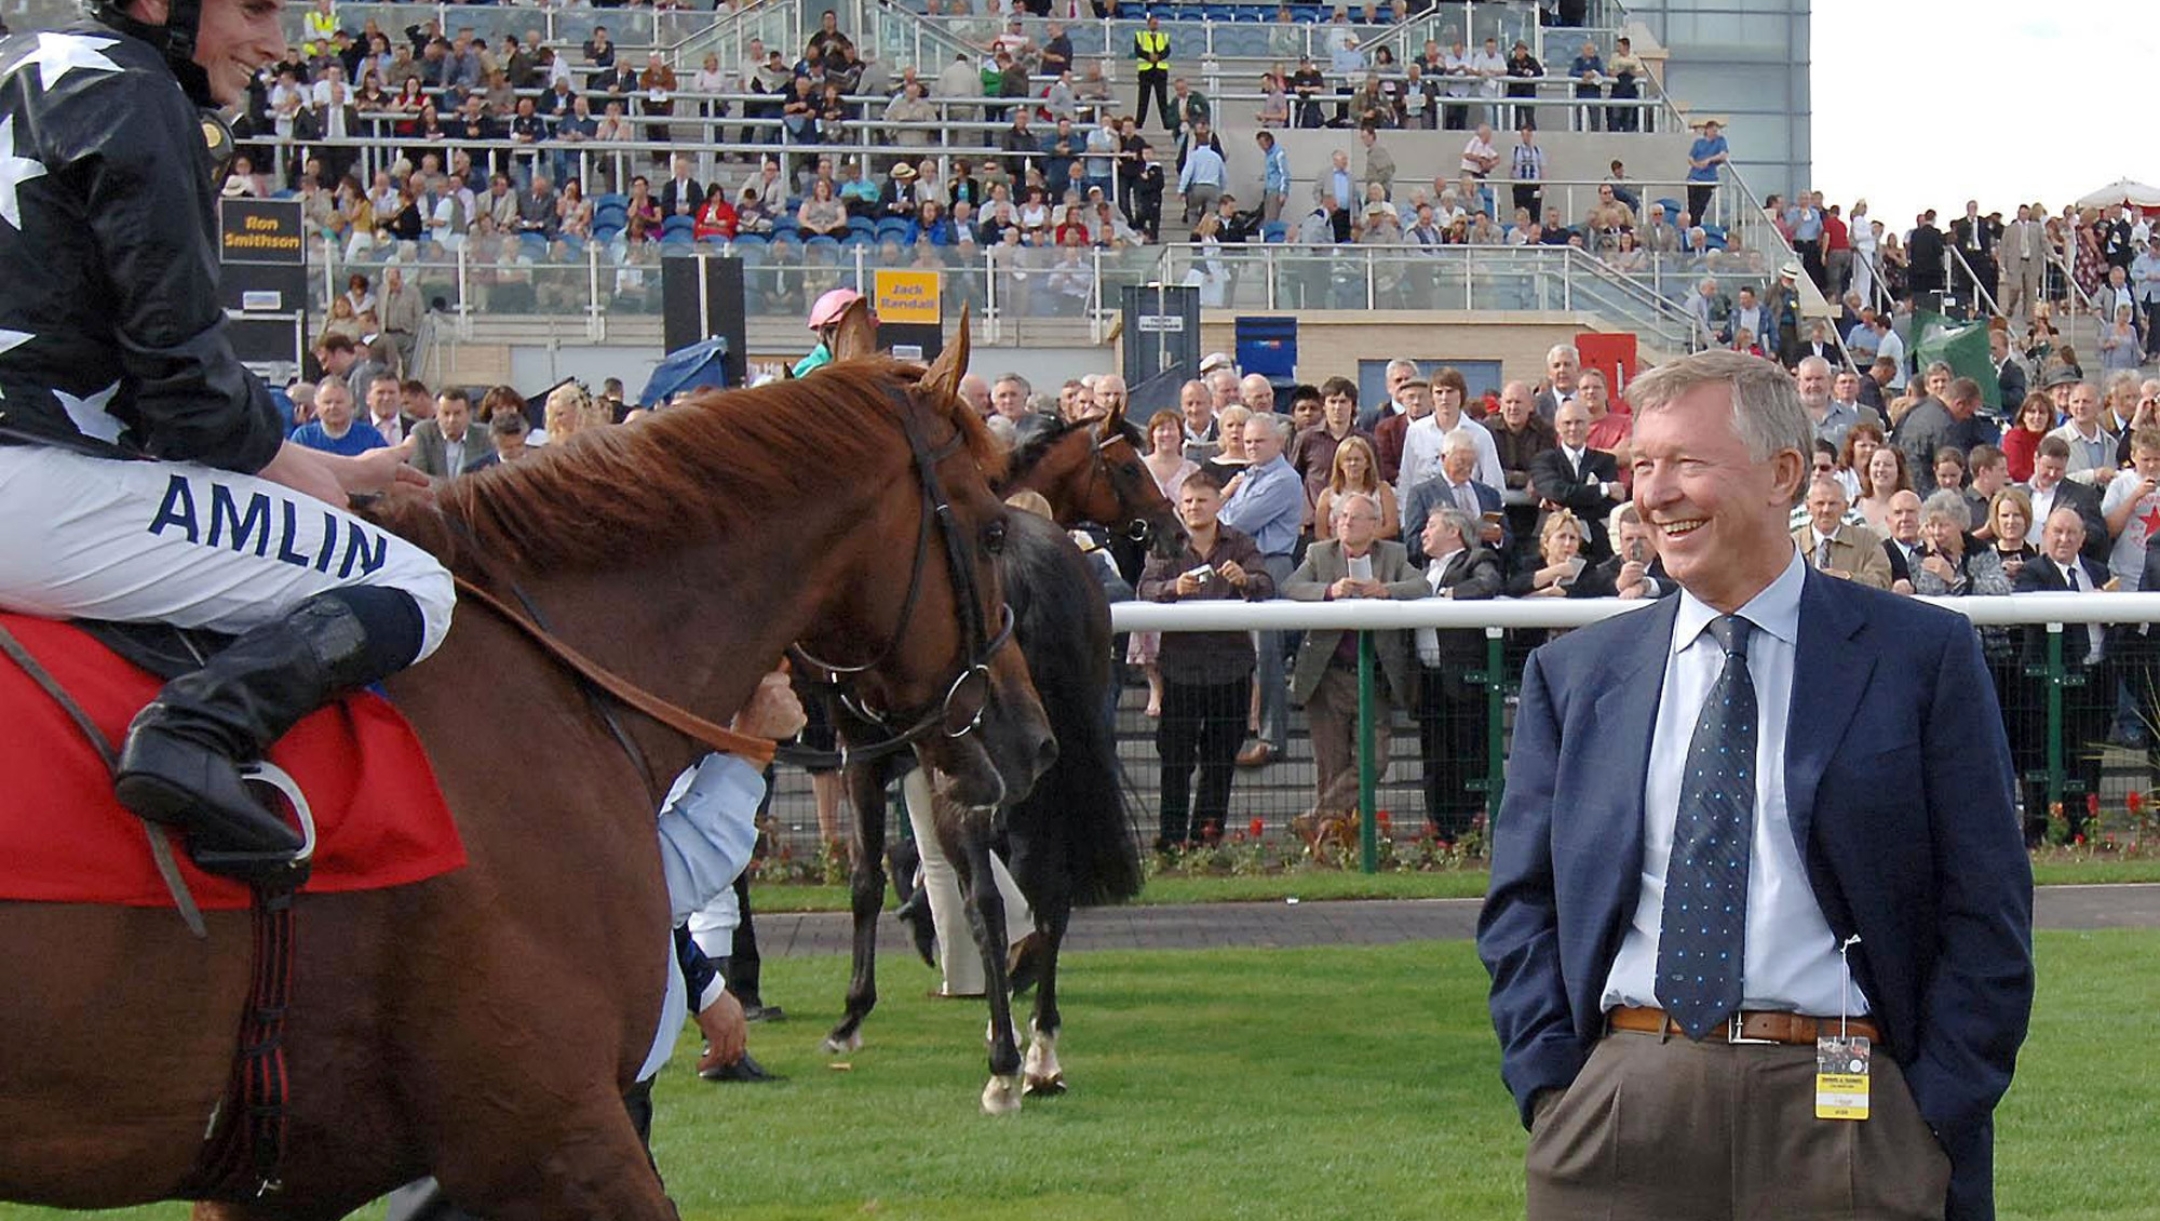 Sir Alex Ferguson, the manager of English Premier League soccer Champions Manchester United, talks with his jockey Ryan Moore after his horse Broomielaw won the Pennine Express Maiden Stakes at Doncaster racecourse, England, Friday Aug. 17, 2007. (AP Photo/PA, John Giles) ** UNITED KINGDOM OUT NO SALES NO ARCHIVE **